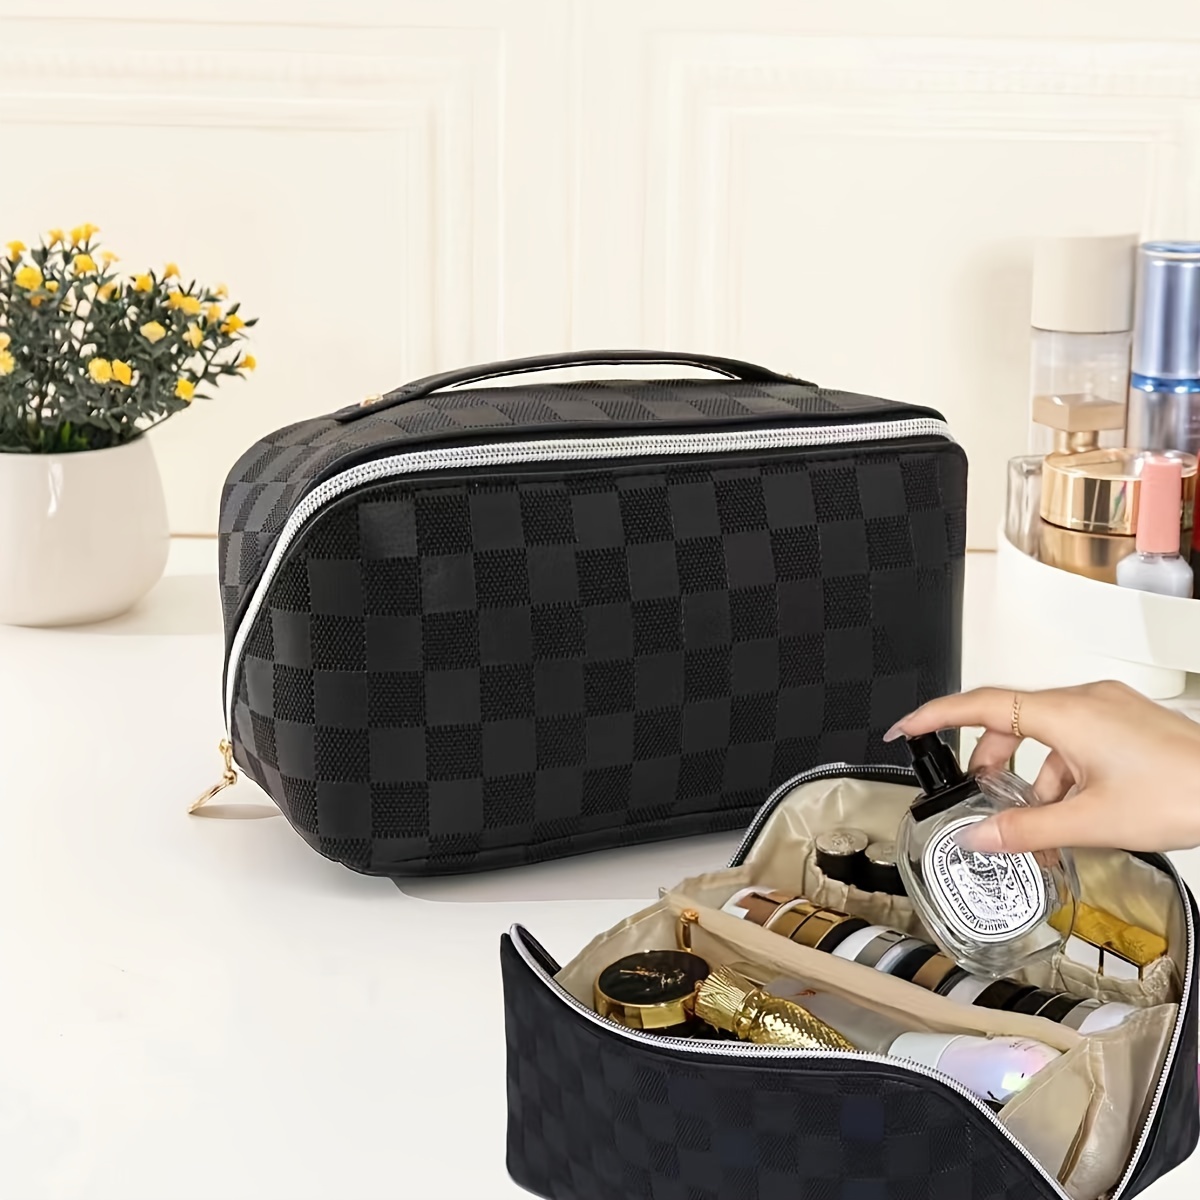 

Travel Makeup Bag, Large Capacity Cosmetic Bag For Women Men, Portable Pouch Open Flat Toiletry Bag Make Up Organizer With Divider And Handle